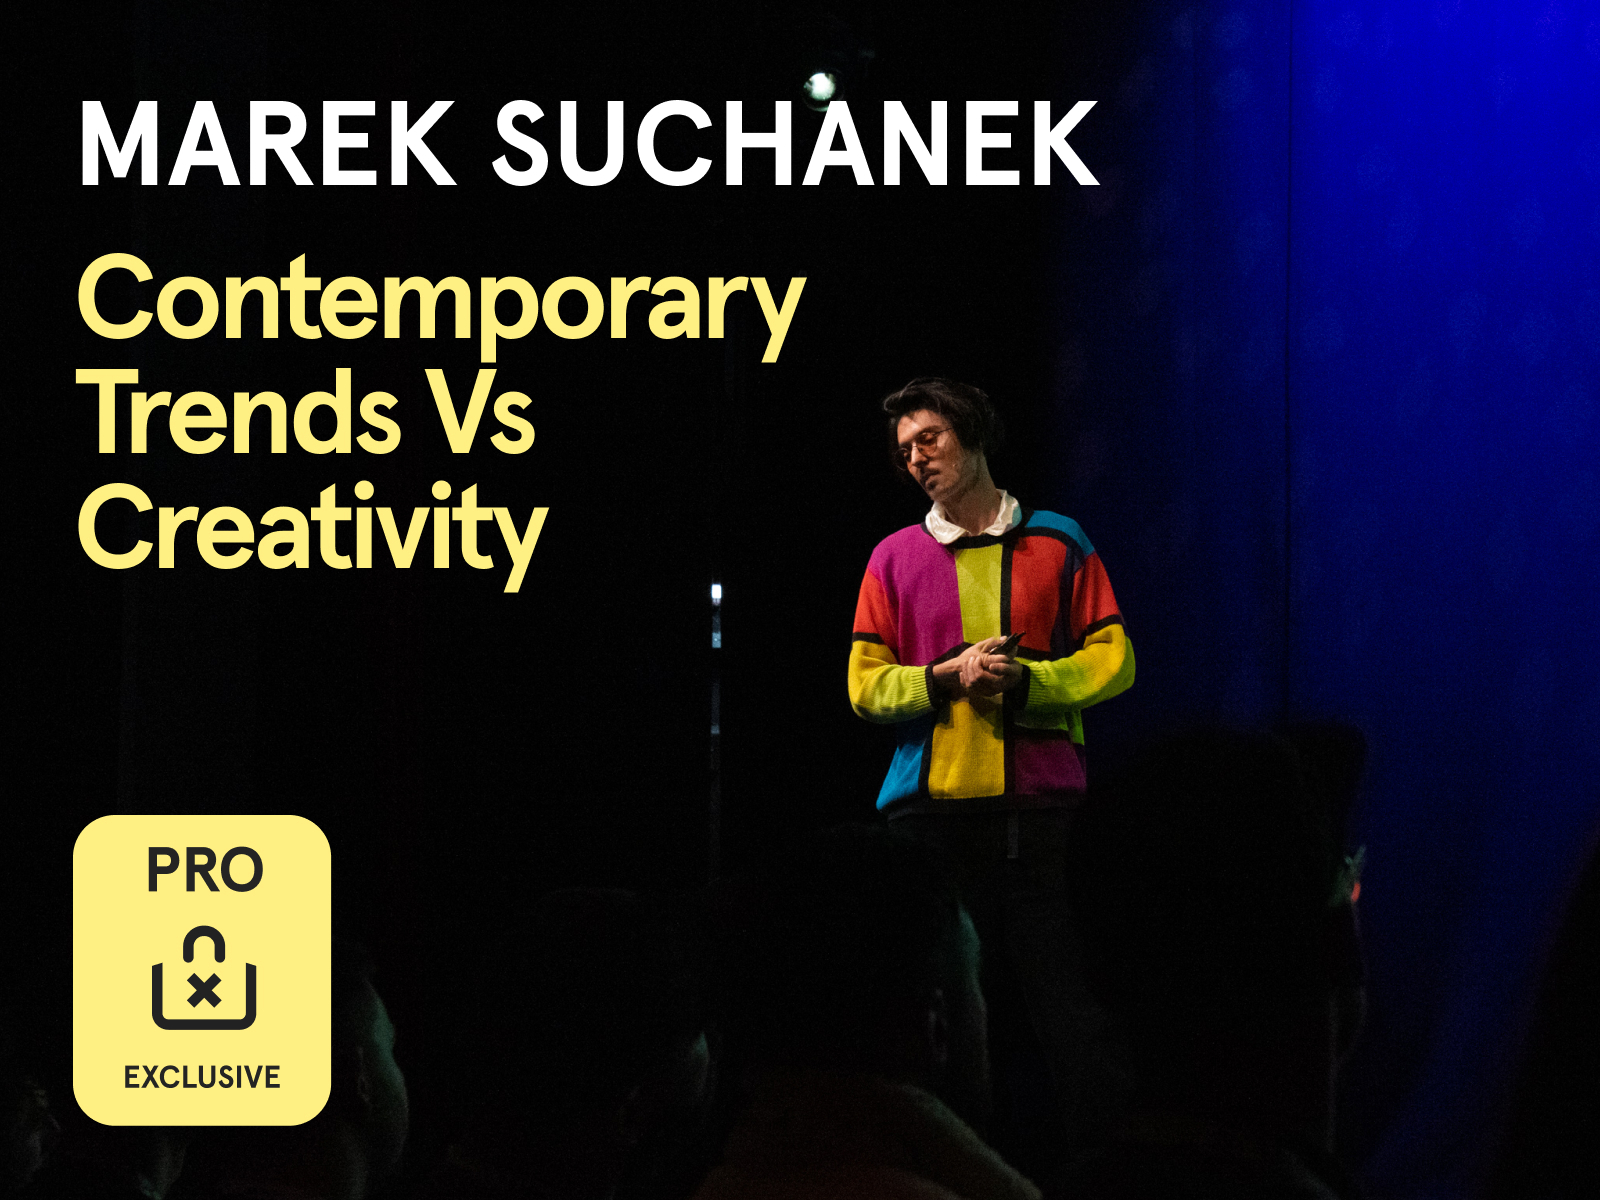 New PRO Content available: watch Marek Suchanek's new talk from Awwwards Conference Amsterdam